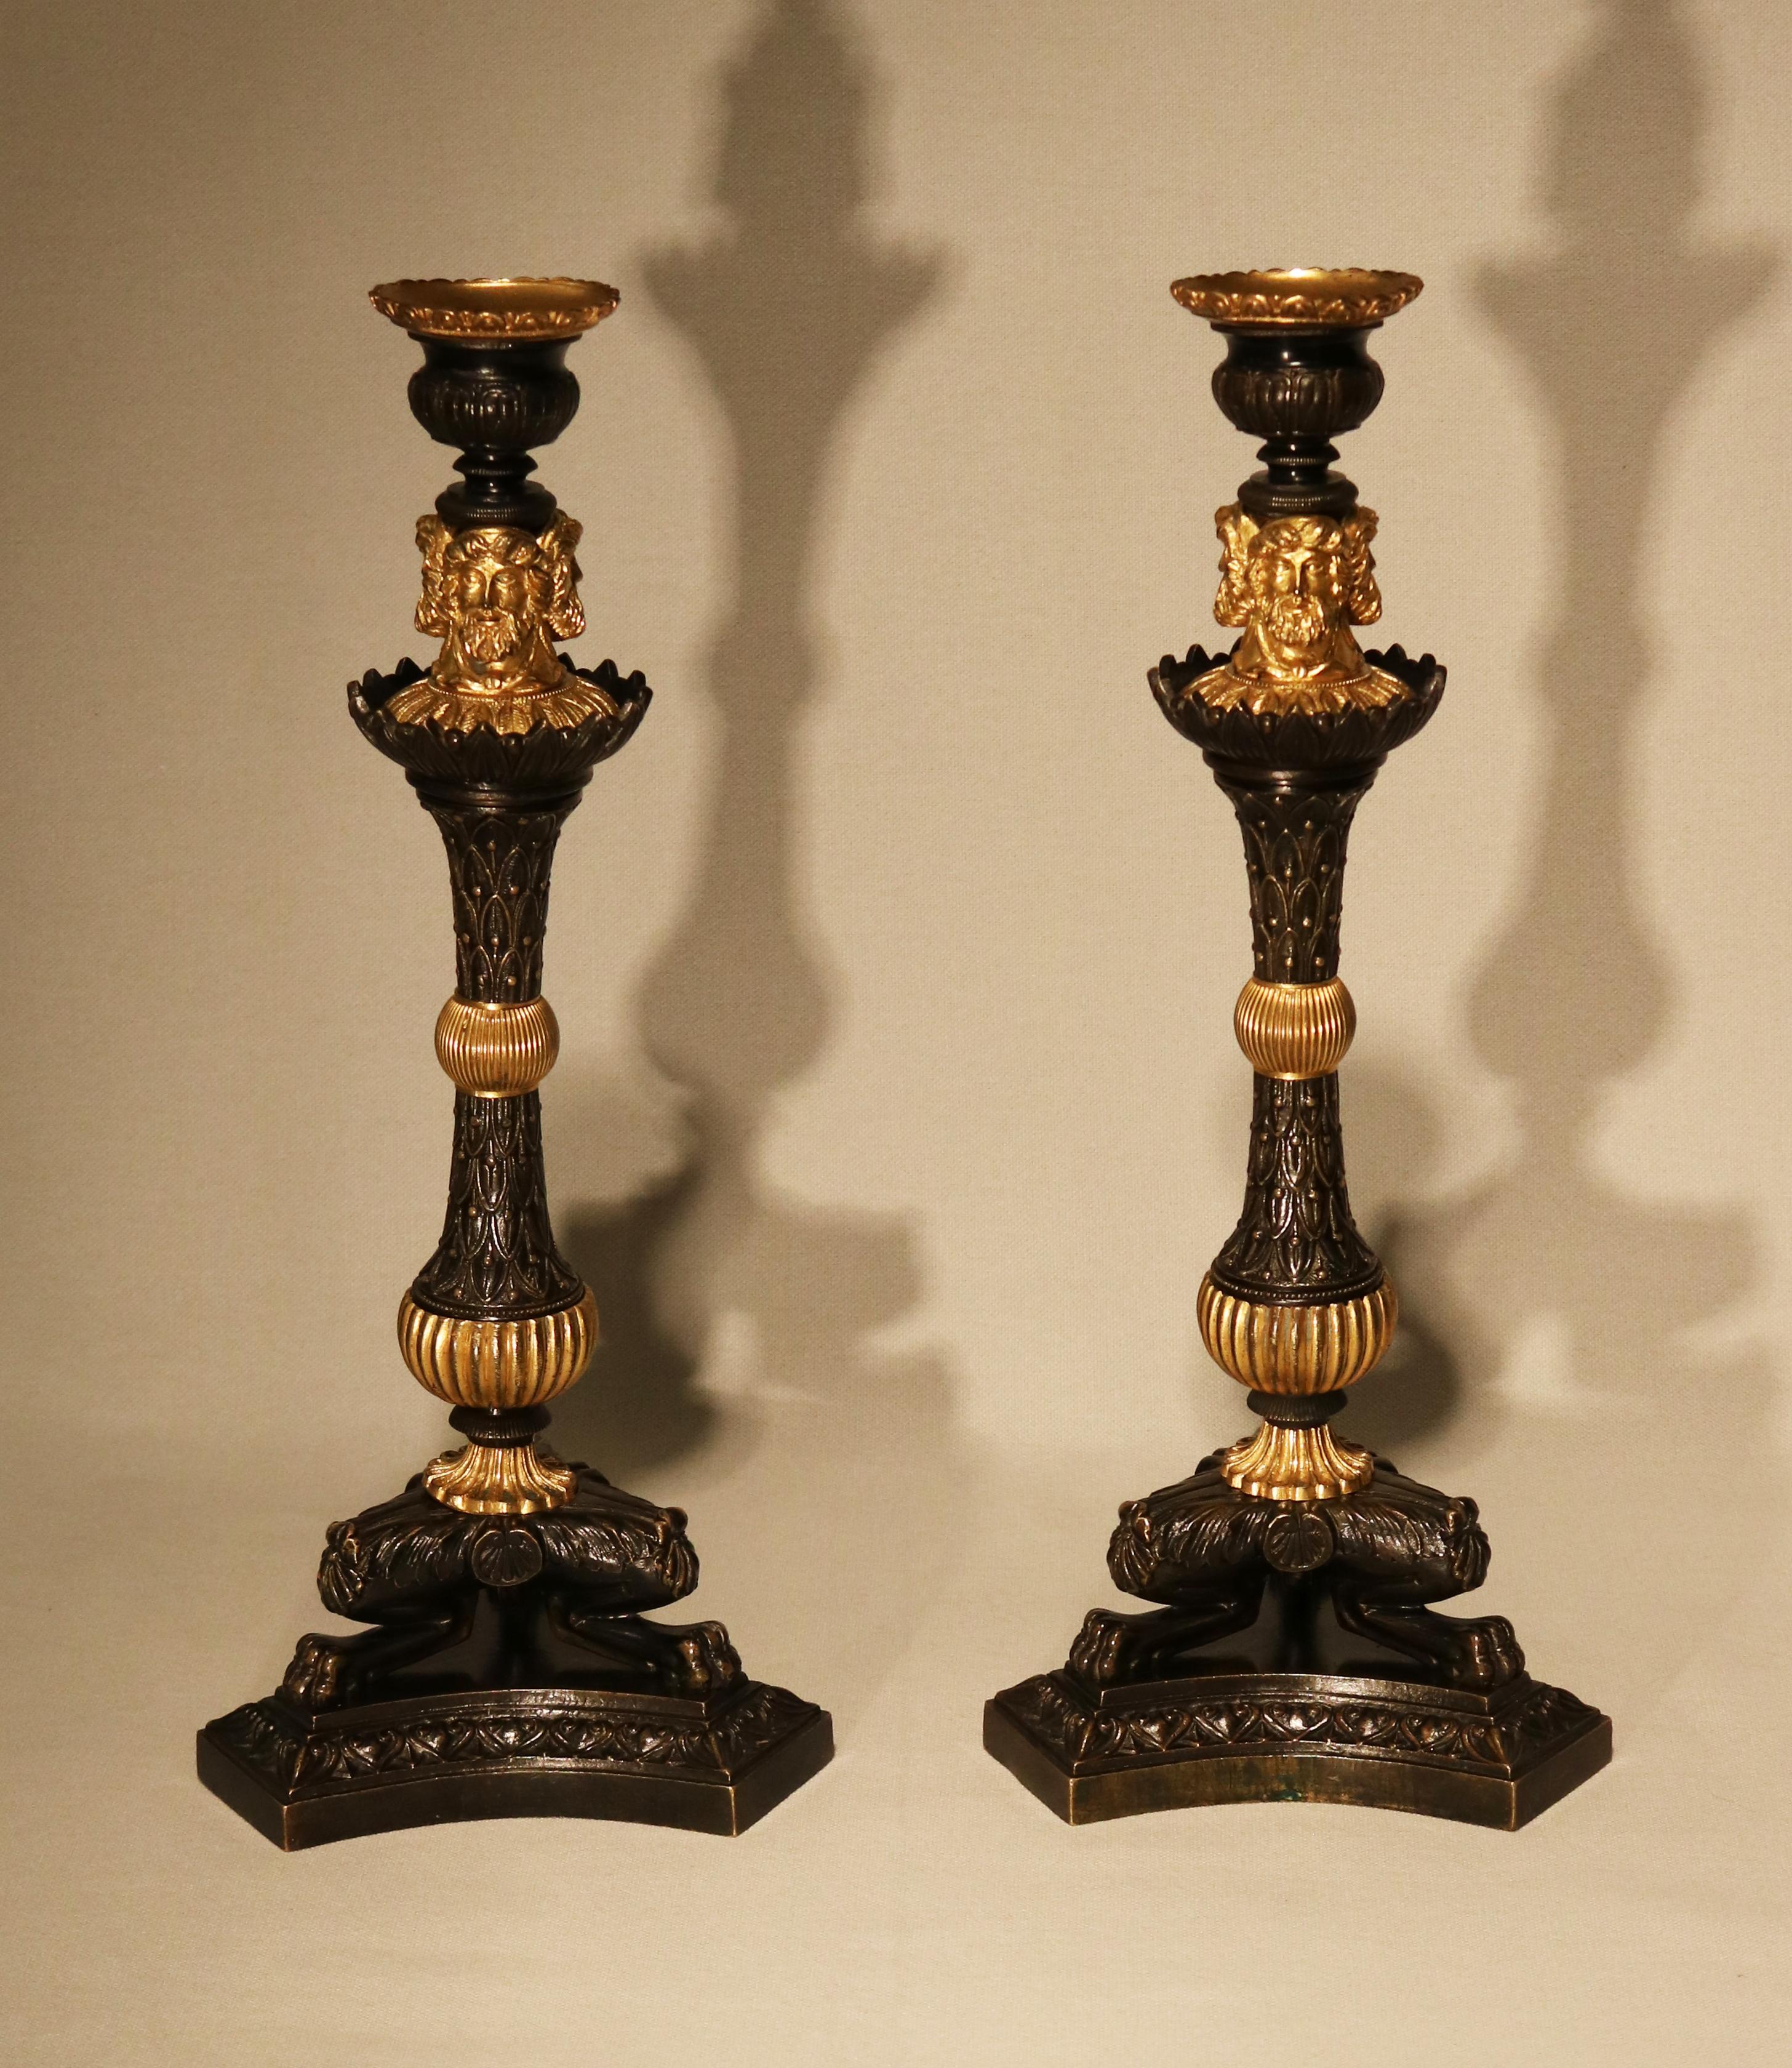 A pair of early 19th century bronze and ormolu candlesticks having urn-shaped sconces above triple above triple classical heads raised on leaf and berry tapering stems centred with reeded ball sections, raised on triform legs with lion’s paw feet